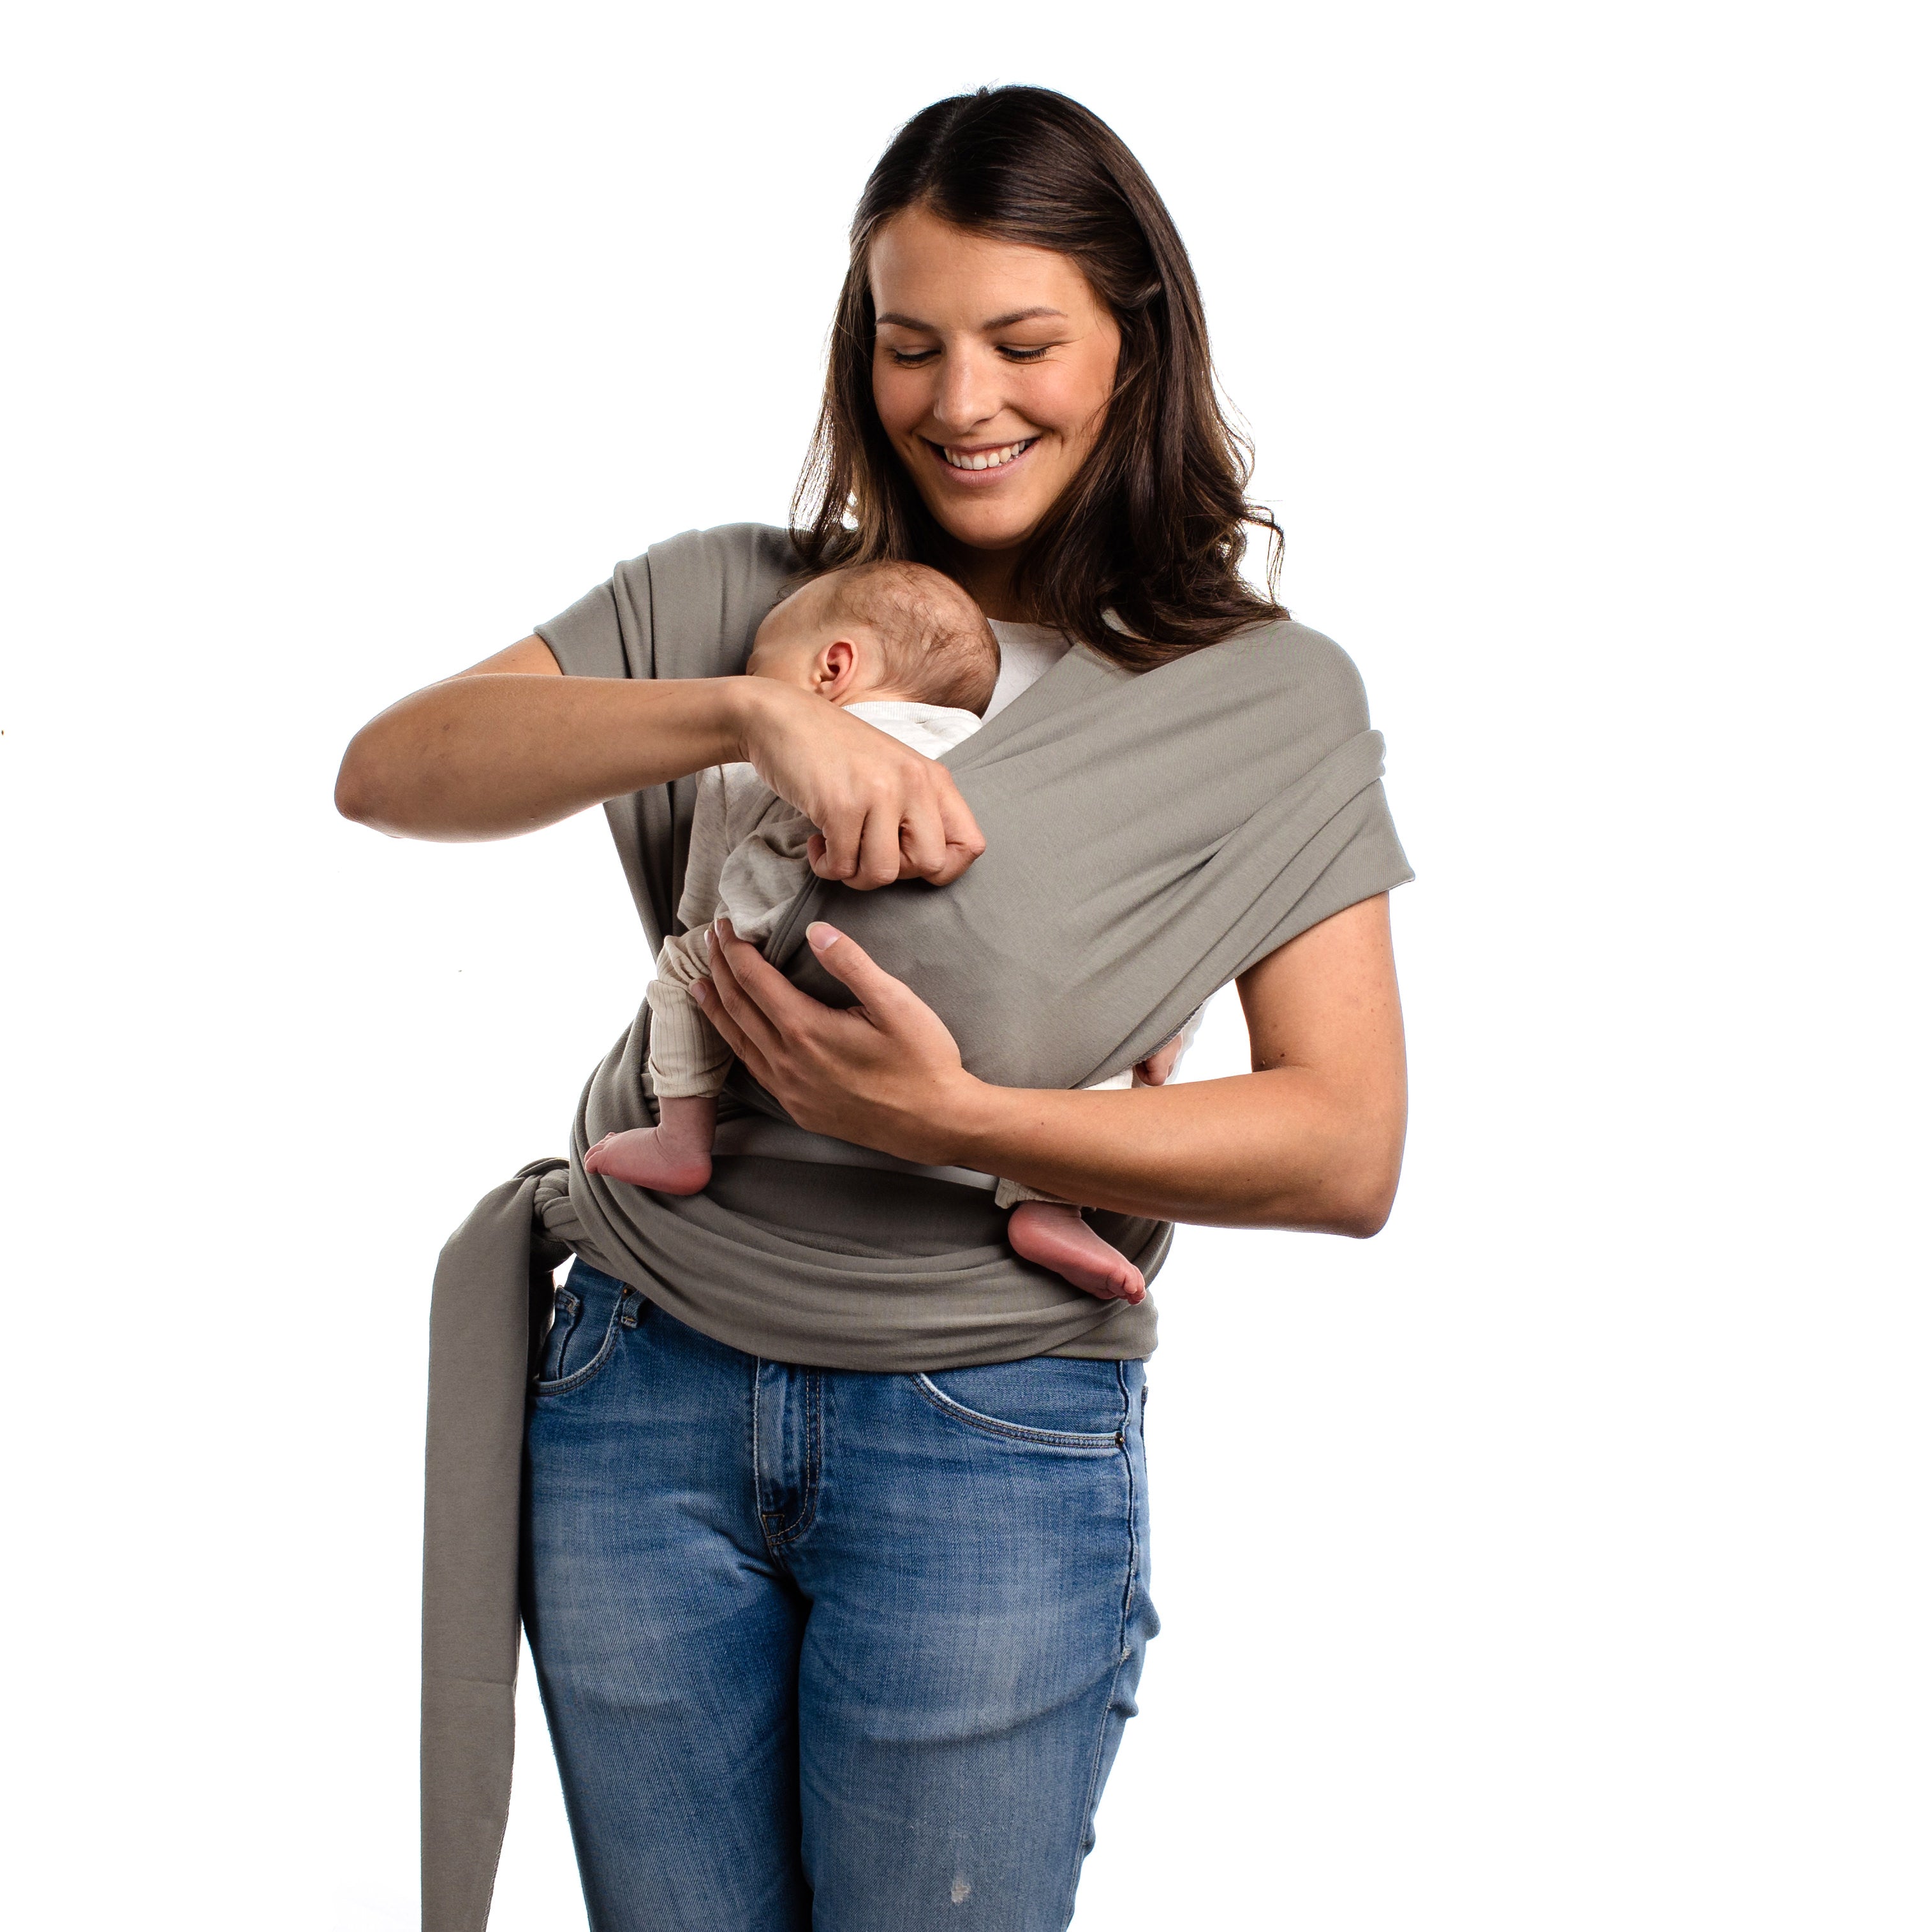 Happy young smiling mom with a newborn baby. She is putting her son in the front carry position in the gray Boba Wrap.